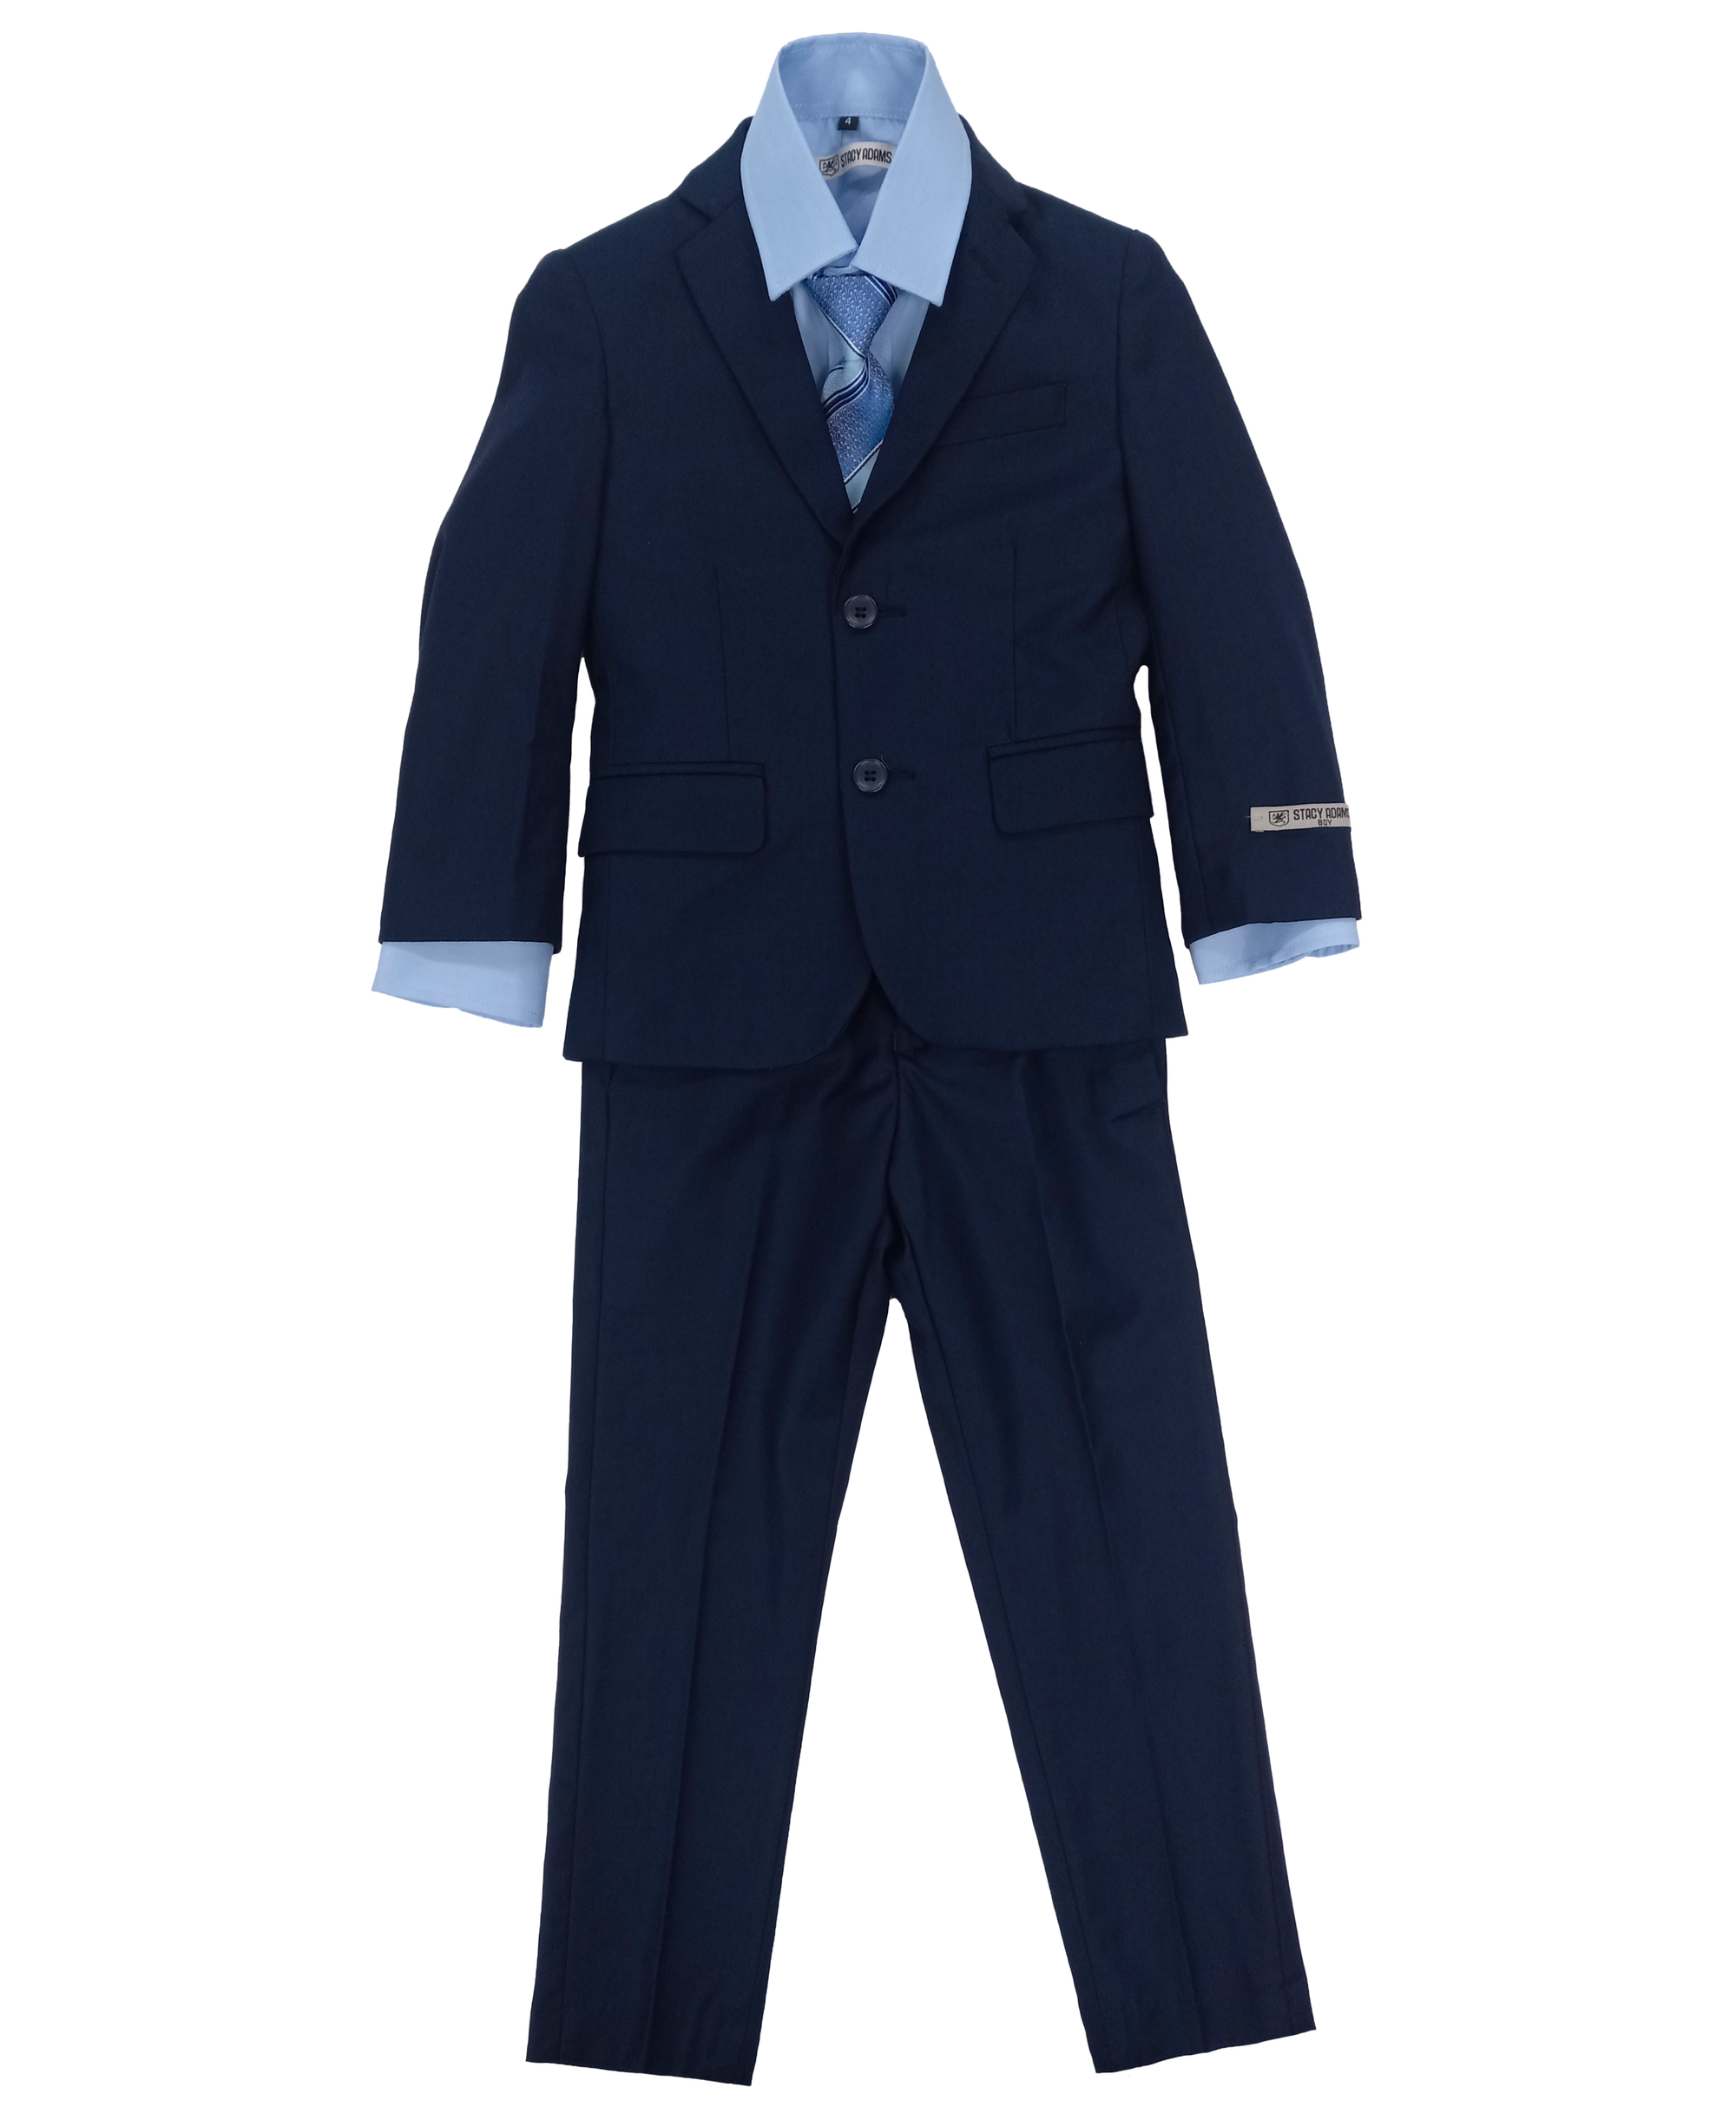 Boys Stacy Adams Navy 5 pc Suits